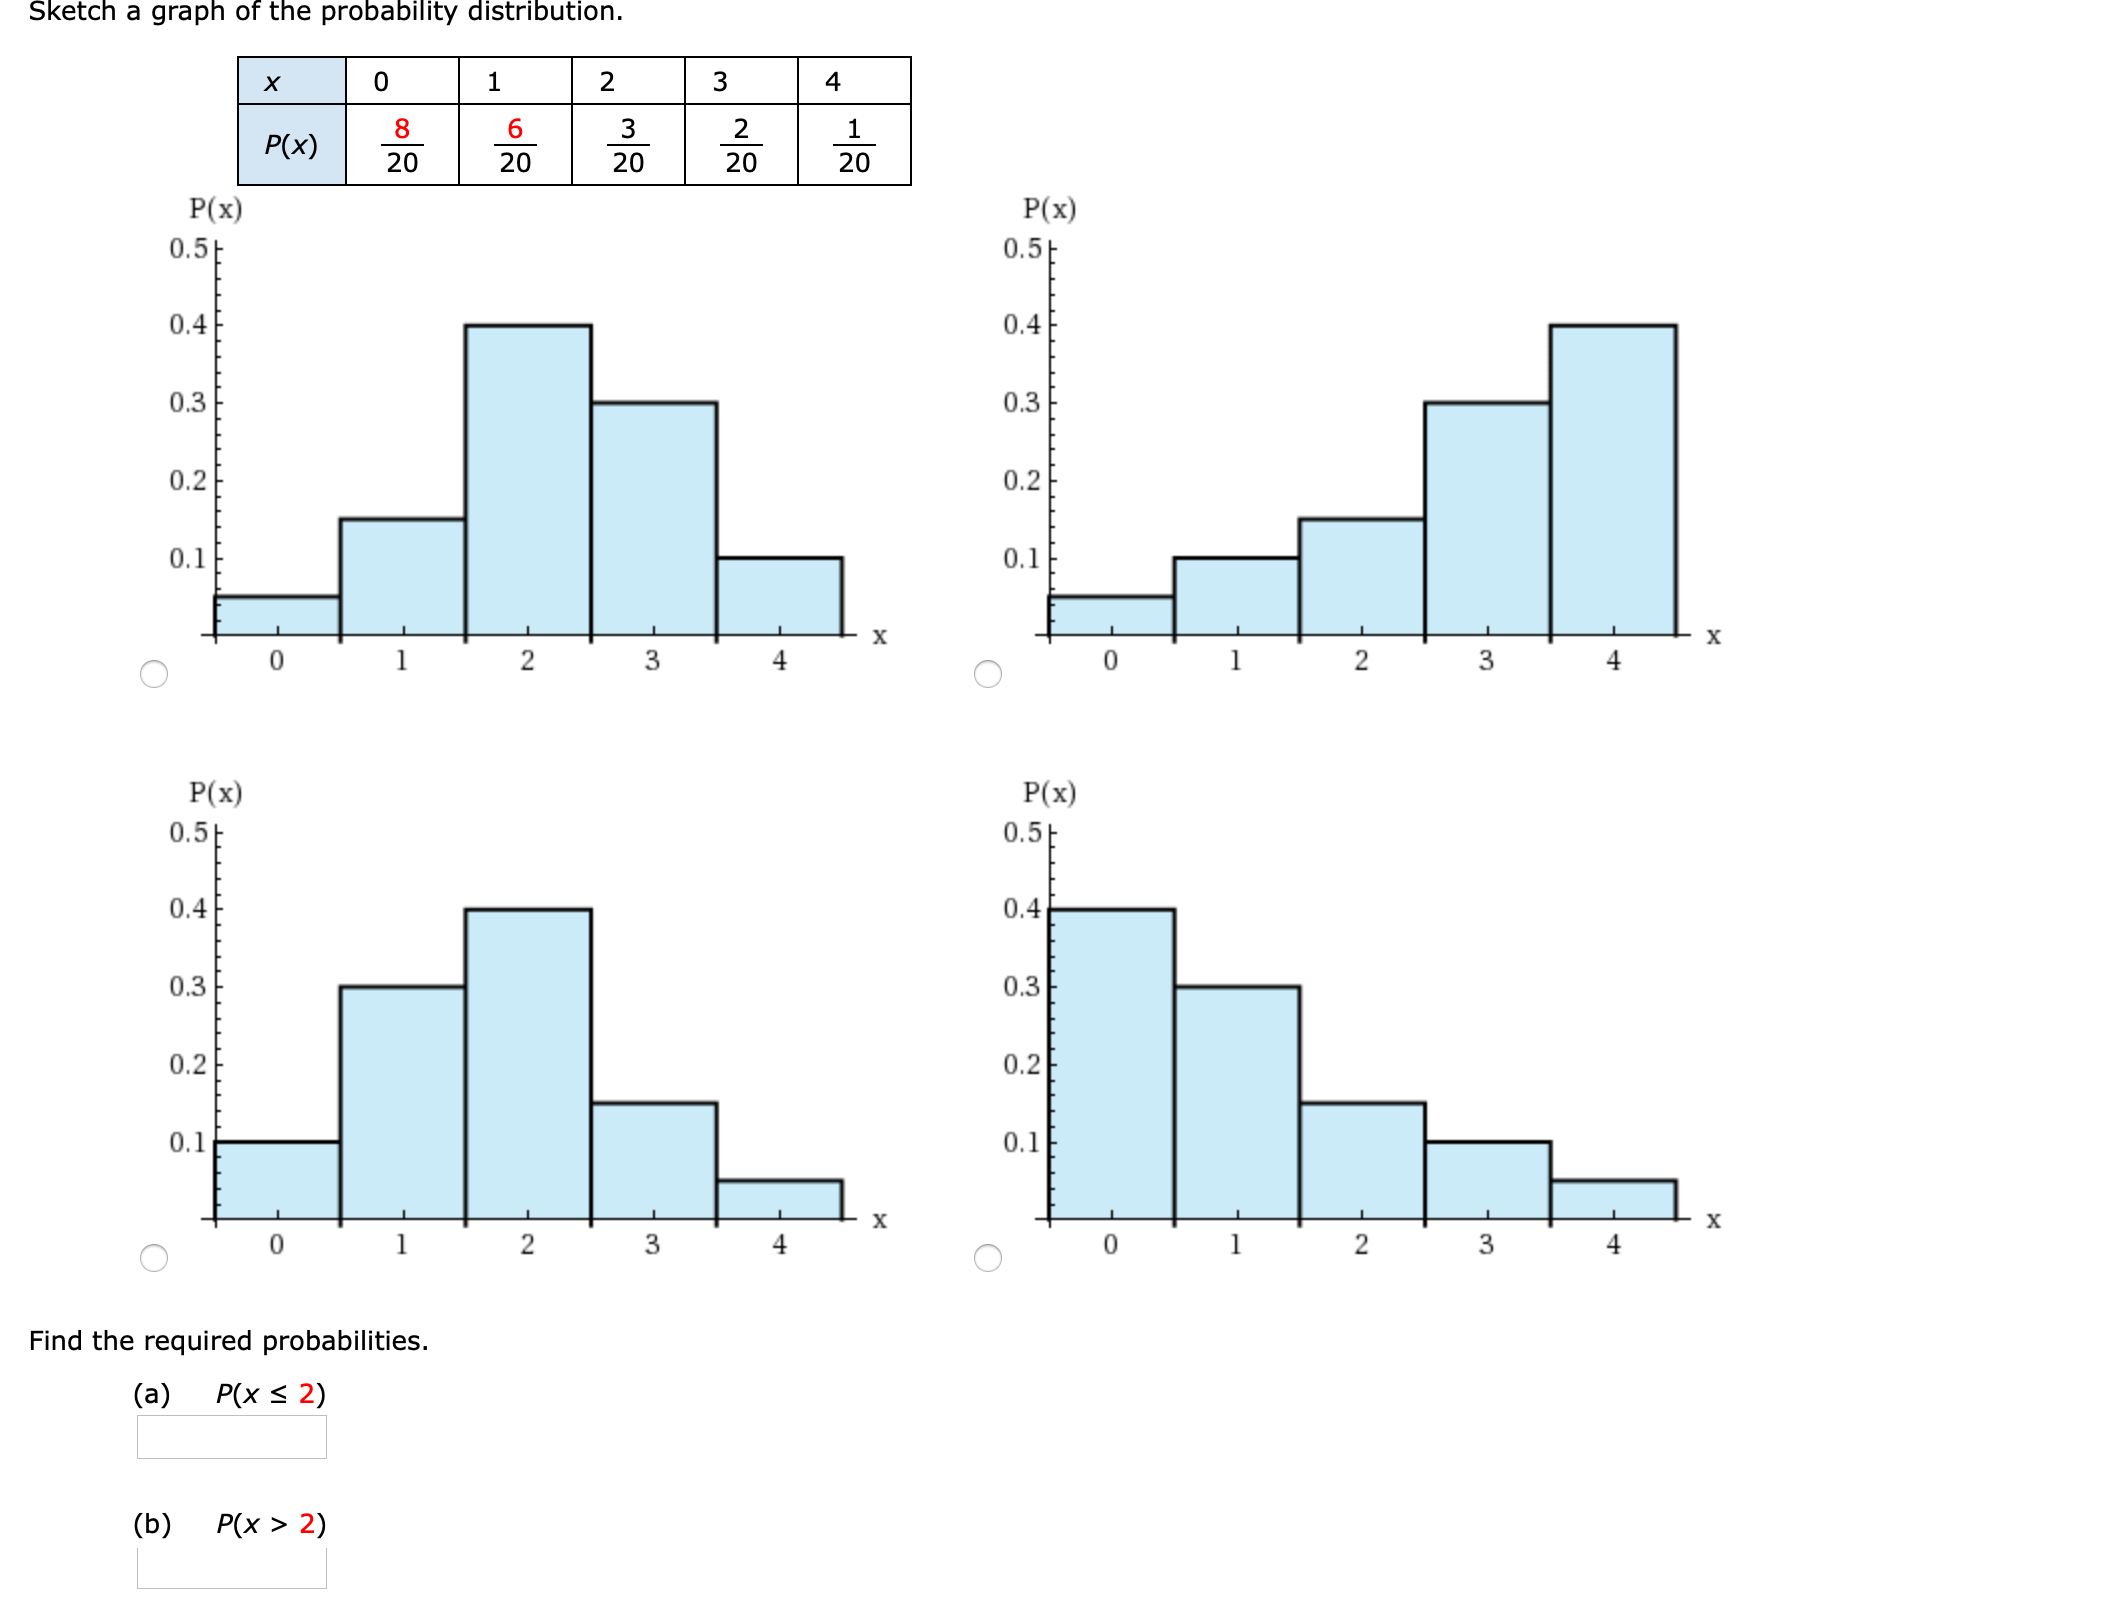 Sketch a graph of the probability distribution.
1
2
3
4
1
P(x)
20
20
20
20
20
Ln. La
P(x)
P(x)
0.5E
0.5
0.4
0.4
0.3
0.3
0.2
0.2
0.1
0.1
2
3
1
3
4
P(x)
P(x)
0.5E
0.5
0.4
0.4
0.3
0.3
0.2
0.2
0.1
0.1
X
1
3
4
1
3
4
Find the required probabilities.
(a)
P(x < 2)
(b)
P(x > 2)
